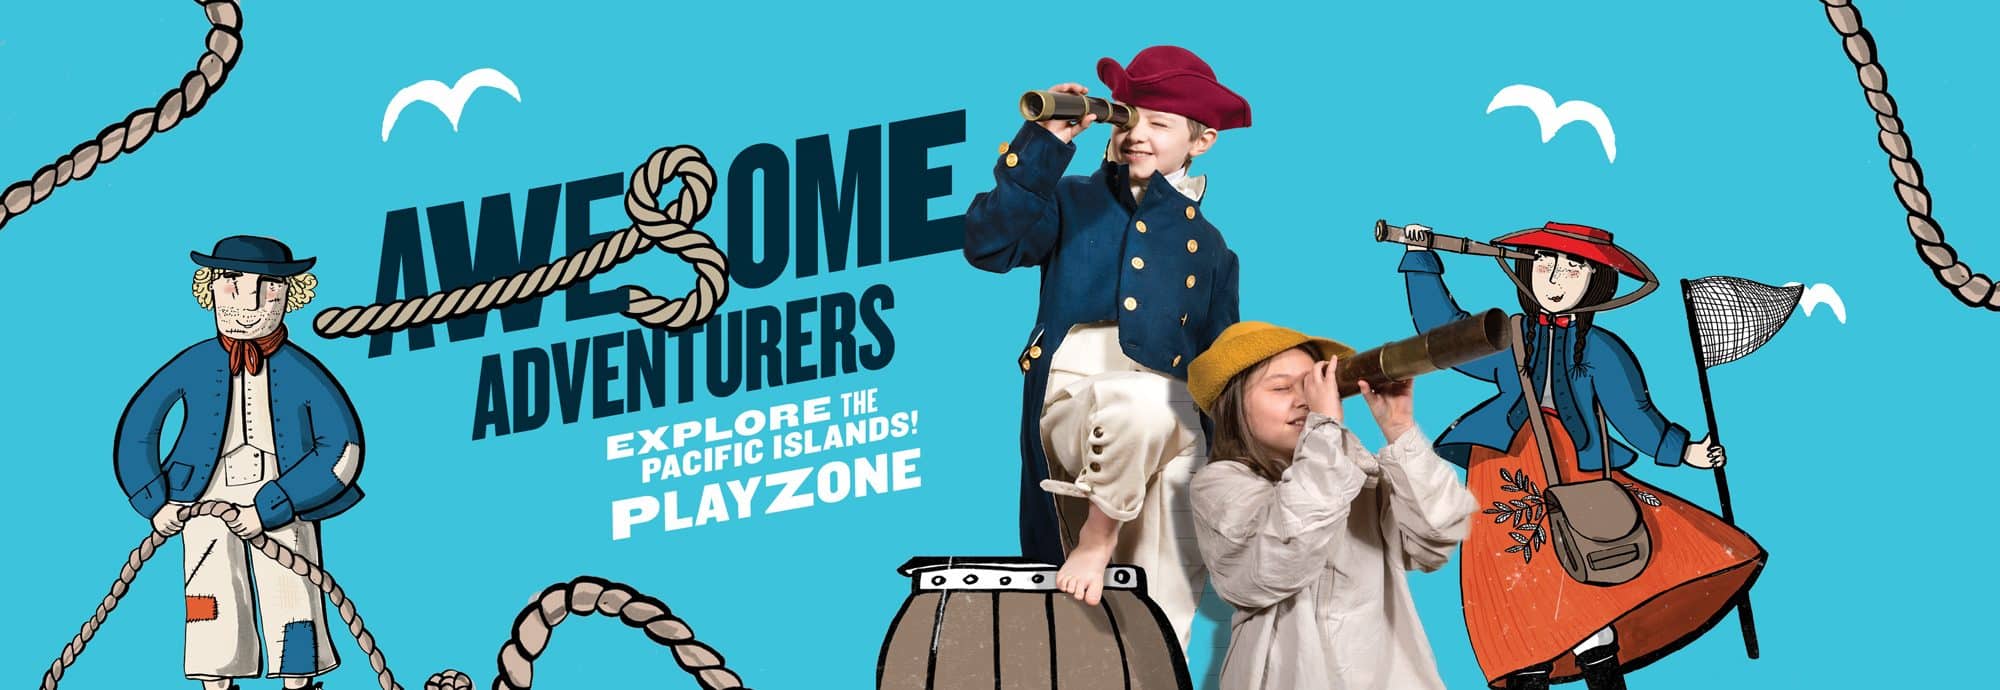 A poster for the Museum's 'Awesome Adventurers' programme, featuring the tagline 'explore the Pacific islands play zone', two children dressed in pirate costumes, and the digital illustration of two pirates.